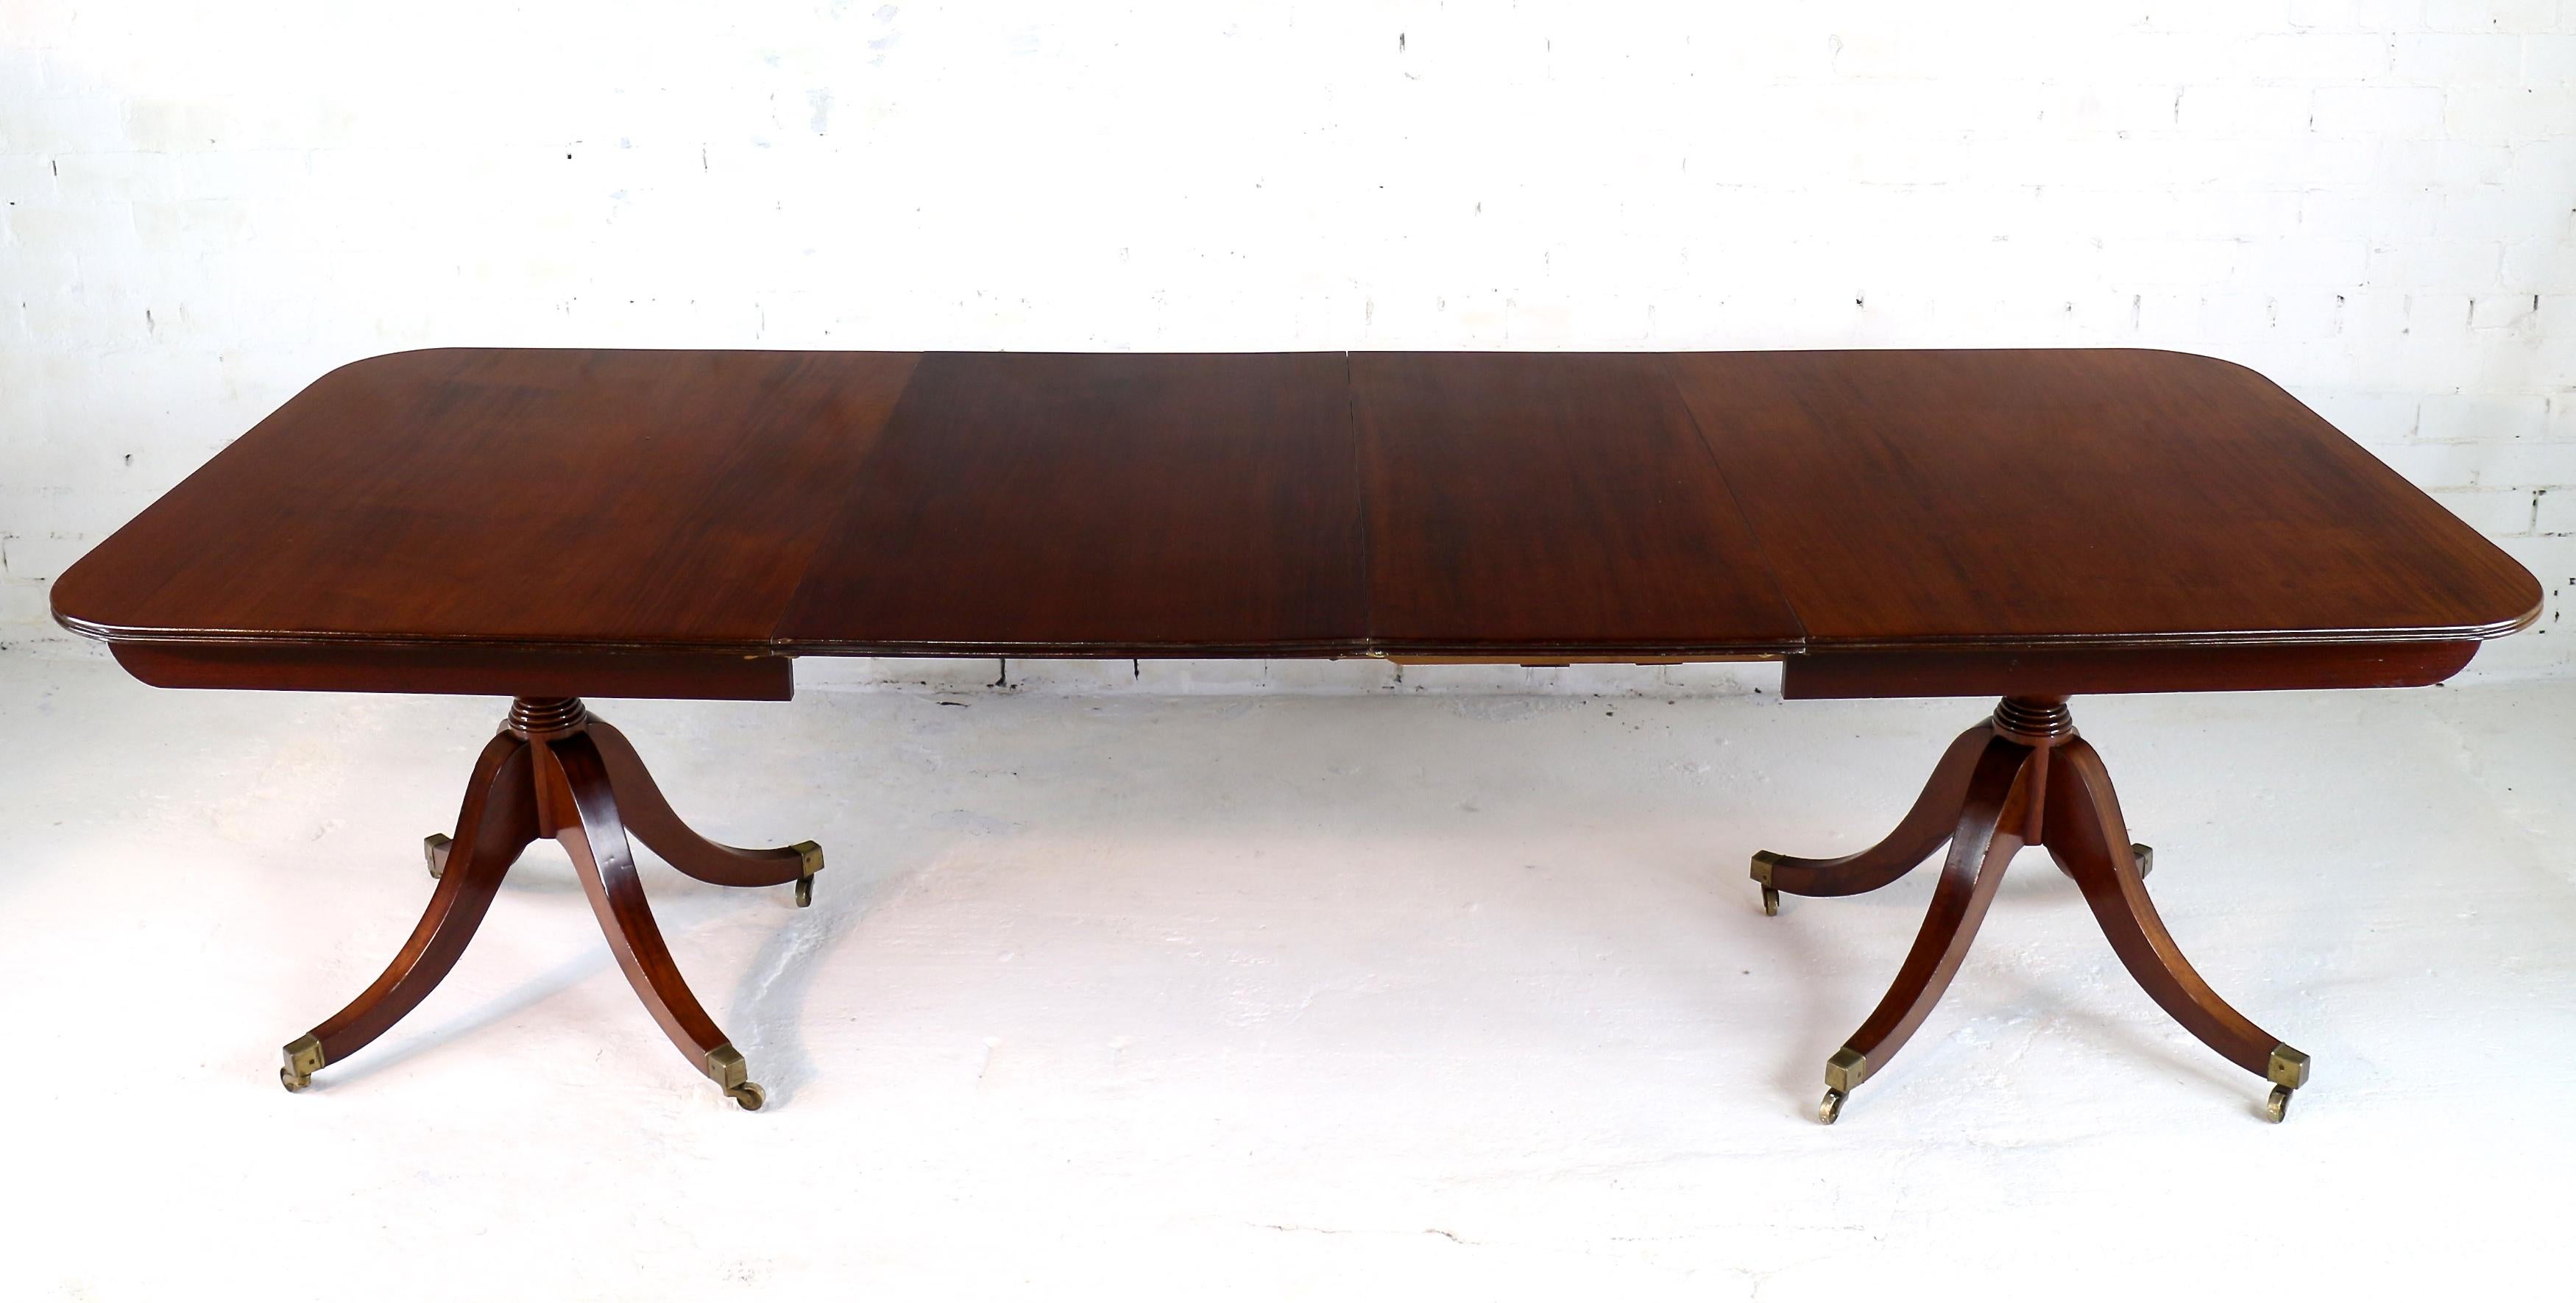 An elegant and well proportioned Regency & later English mahogany twin pedestal extending dining table with two additional leaves. This handsome table features an original early 19th century solid mahogany top with a reeded edge supported on early